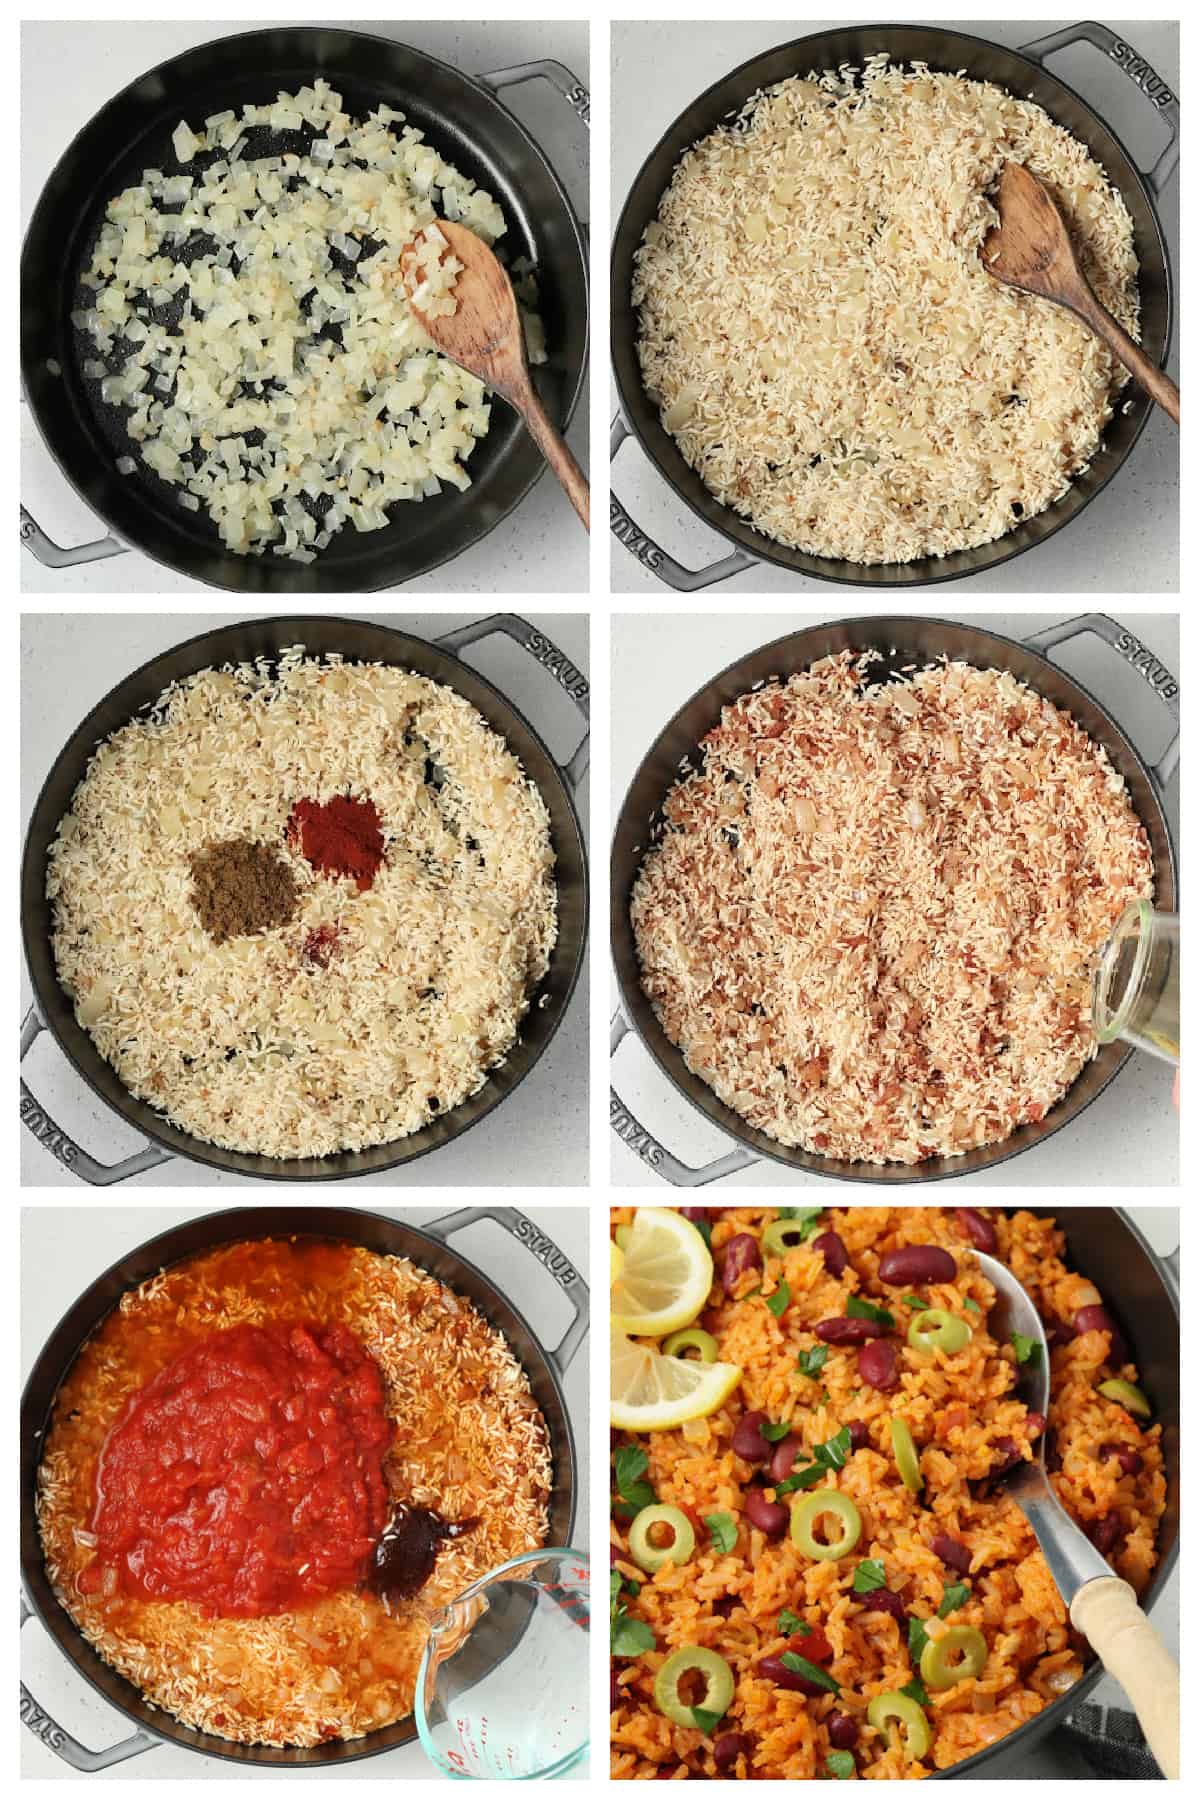 6 process photos showing how to cook the rice. 